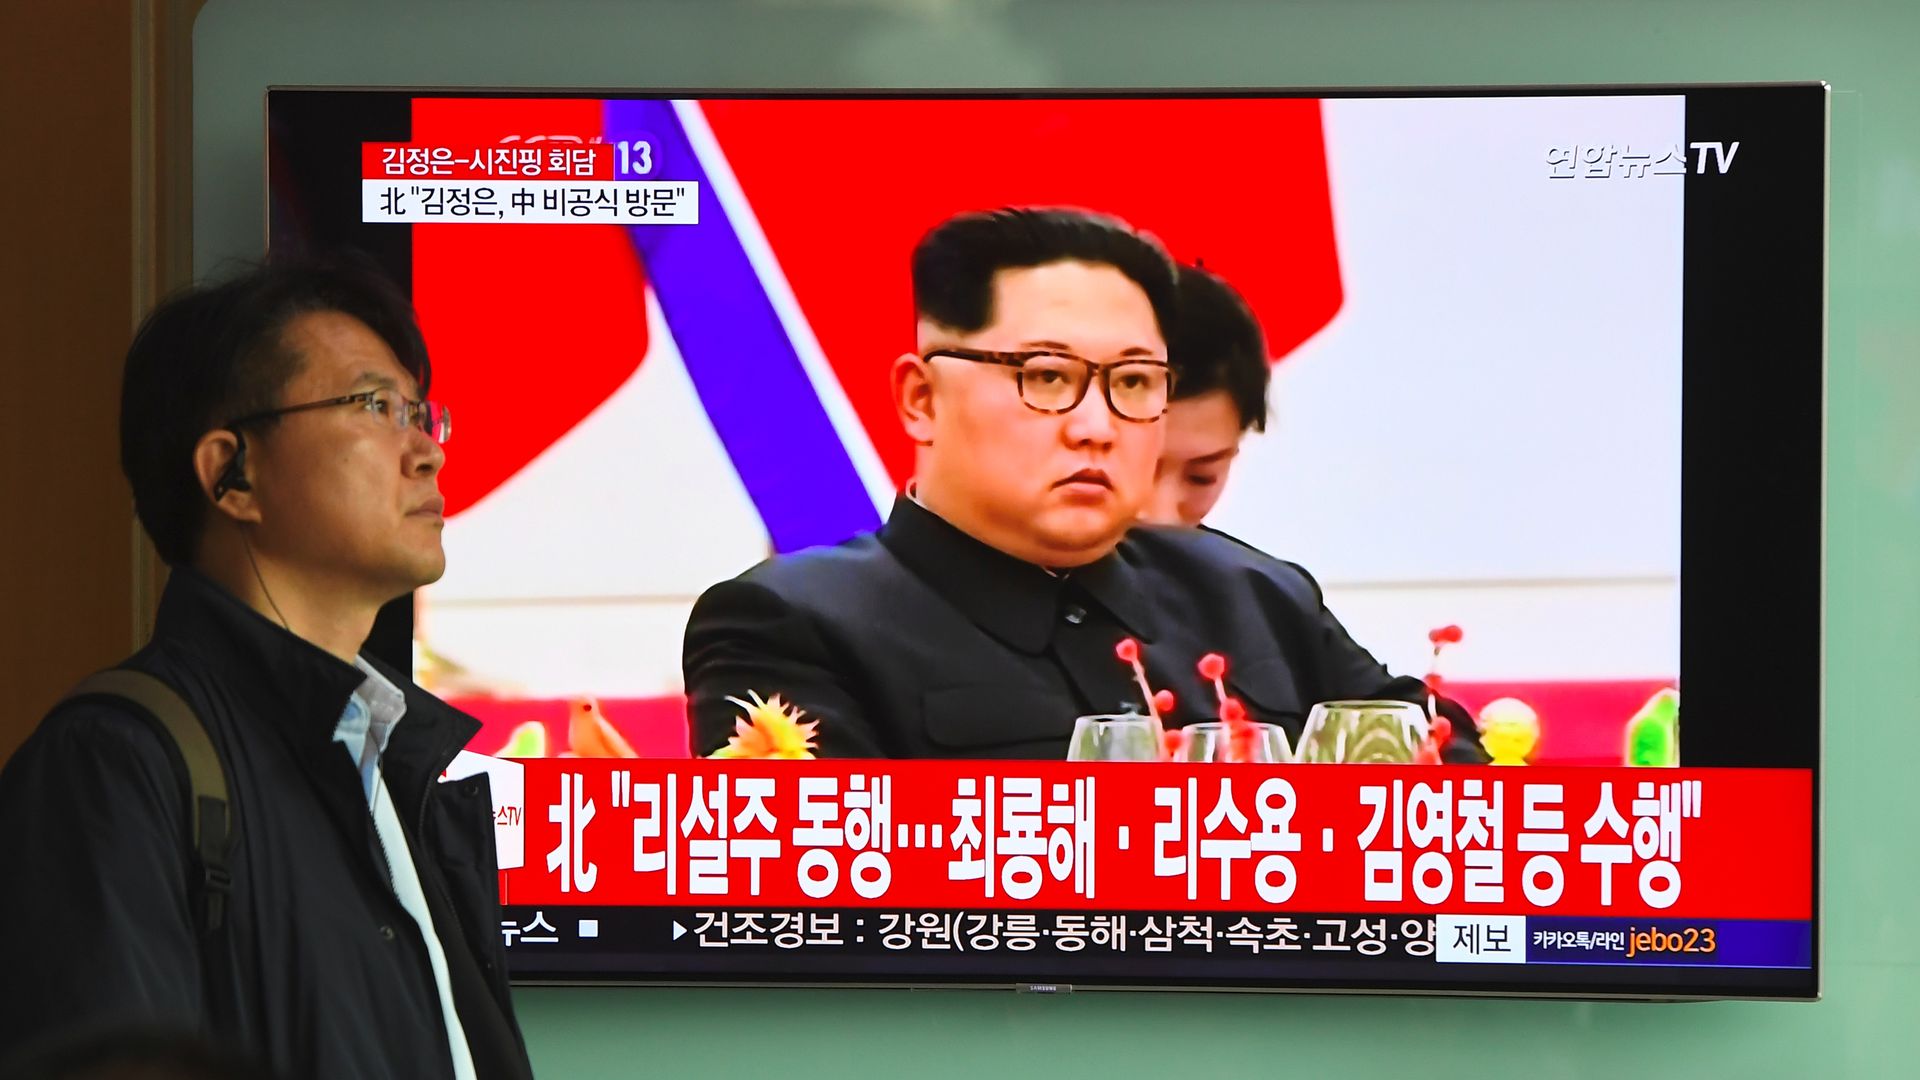 Kim Jong-un displayed on a TV with a red backdrop.